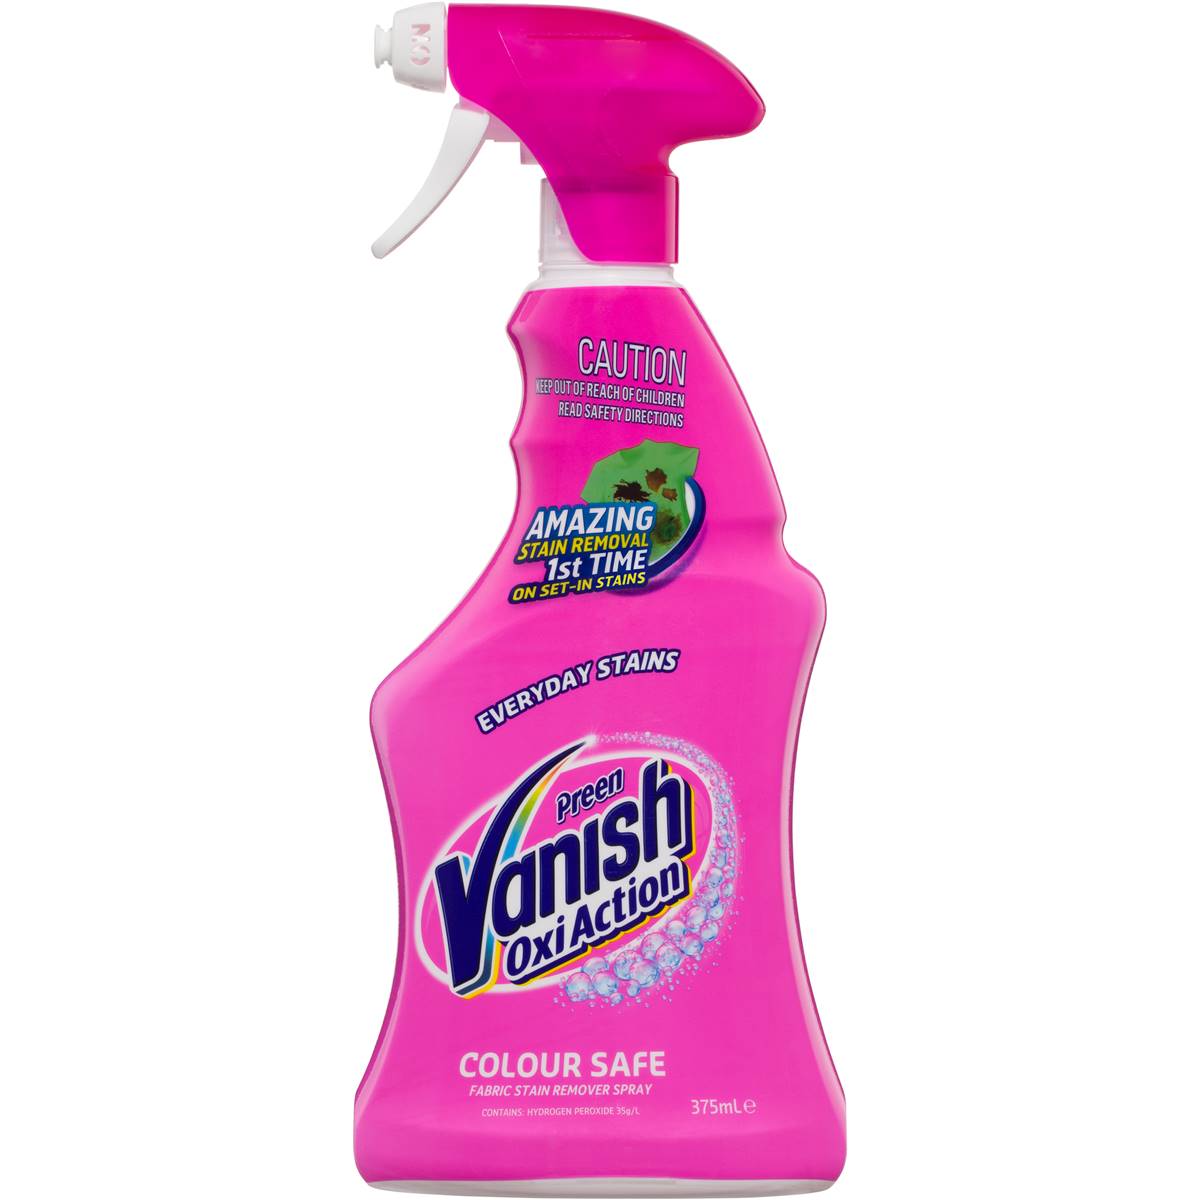 Preen Vanish Oxi Action Stain Remover Trigger Spray 375mL